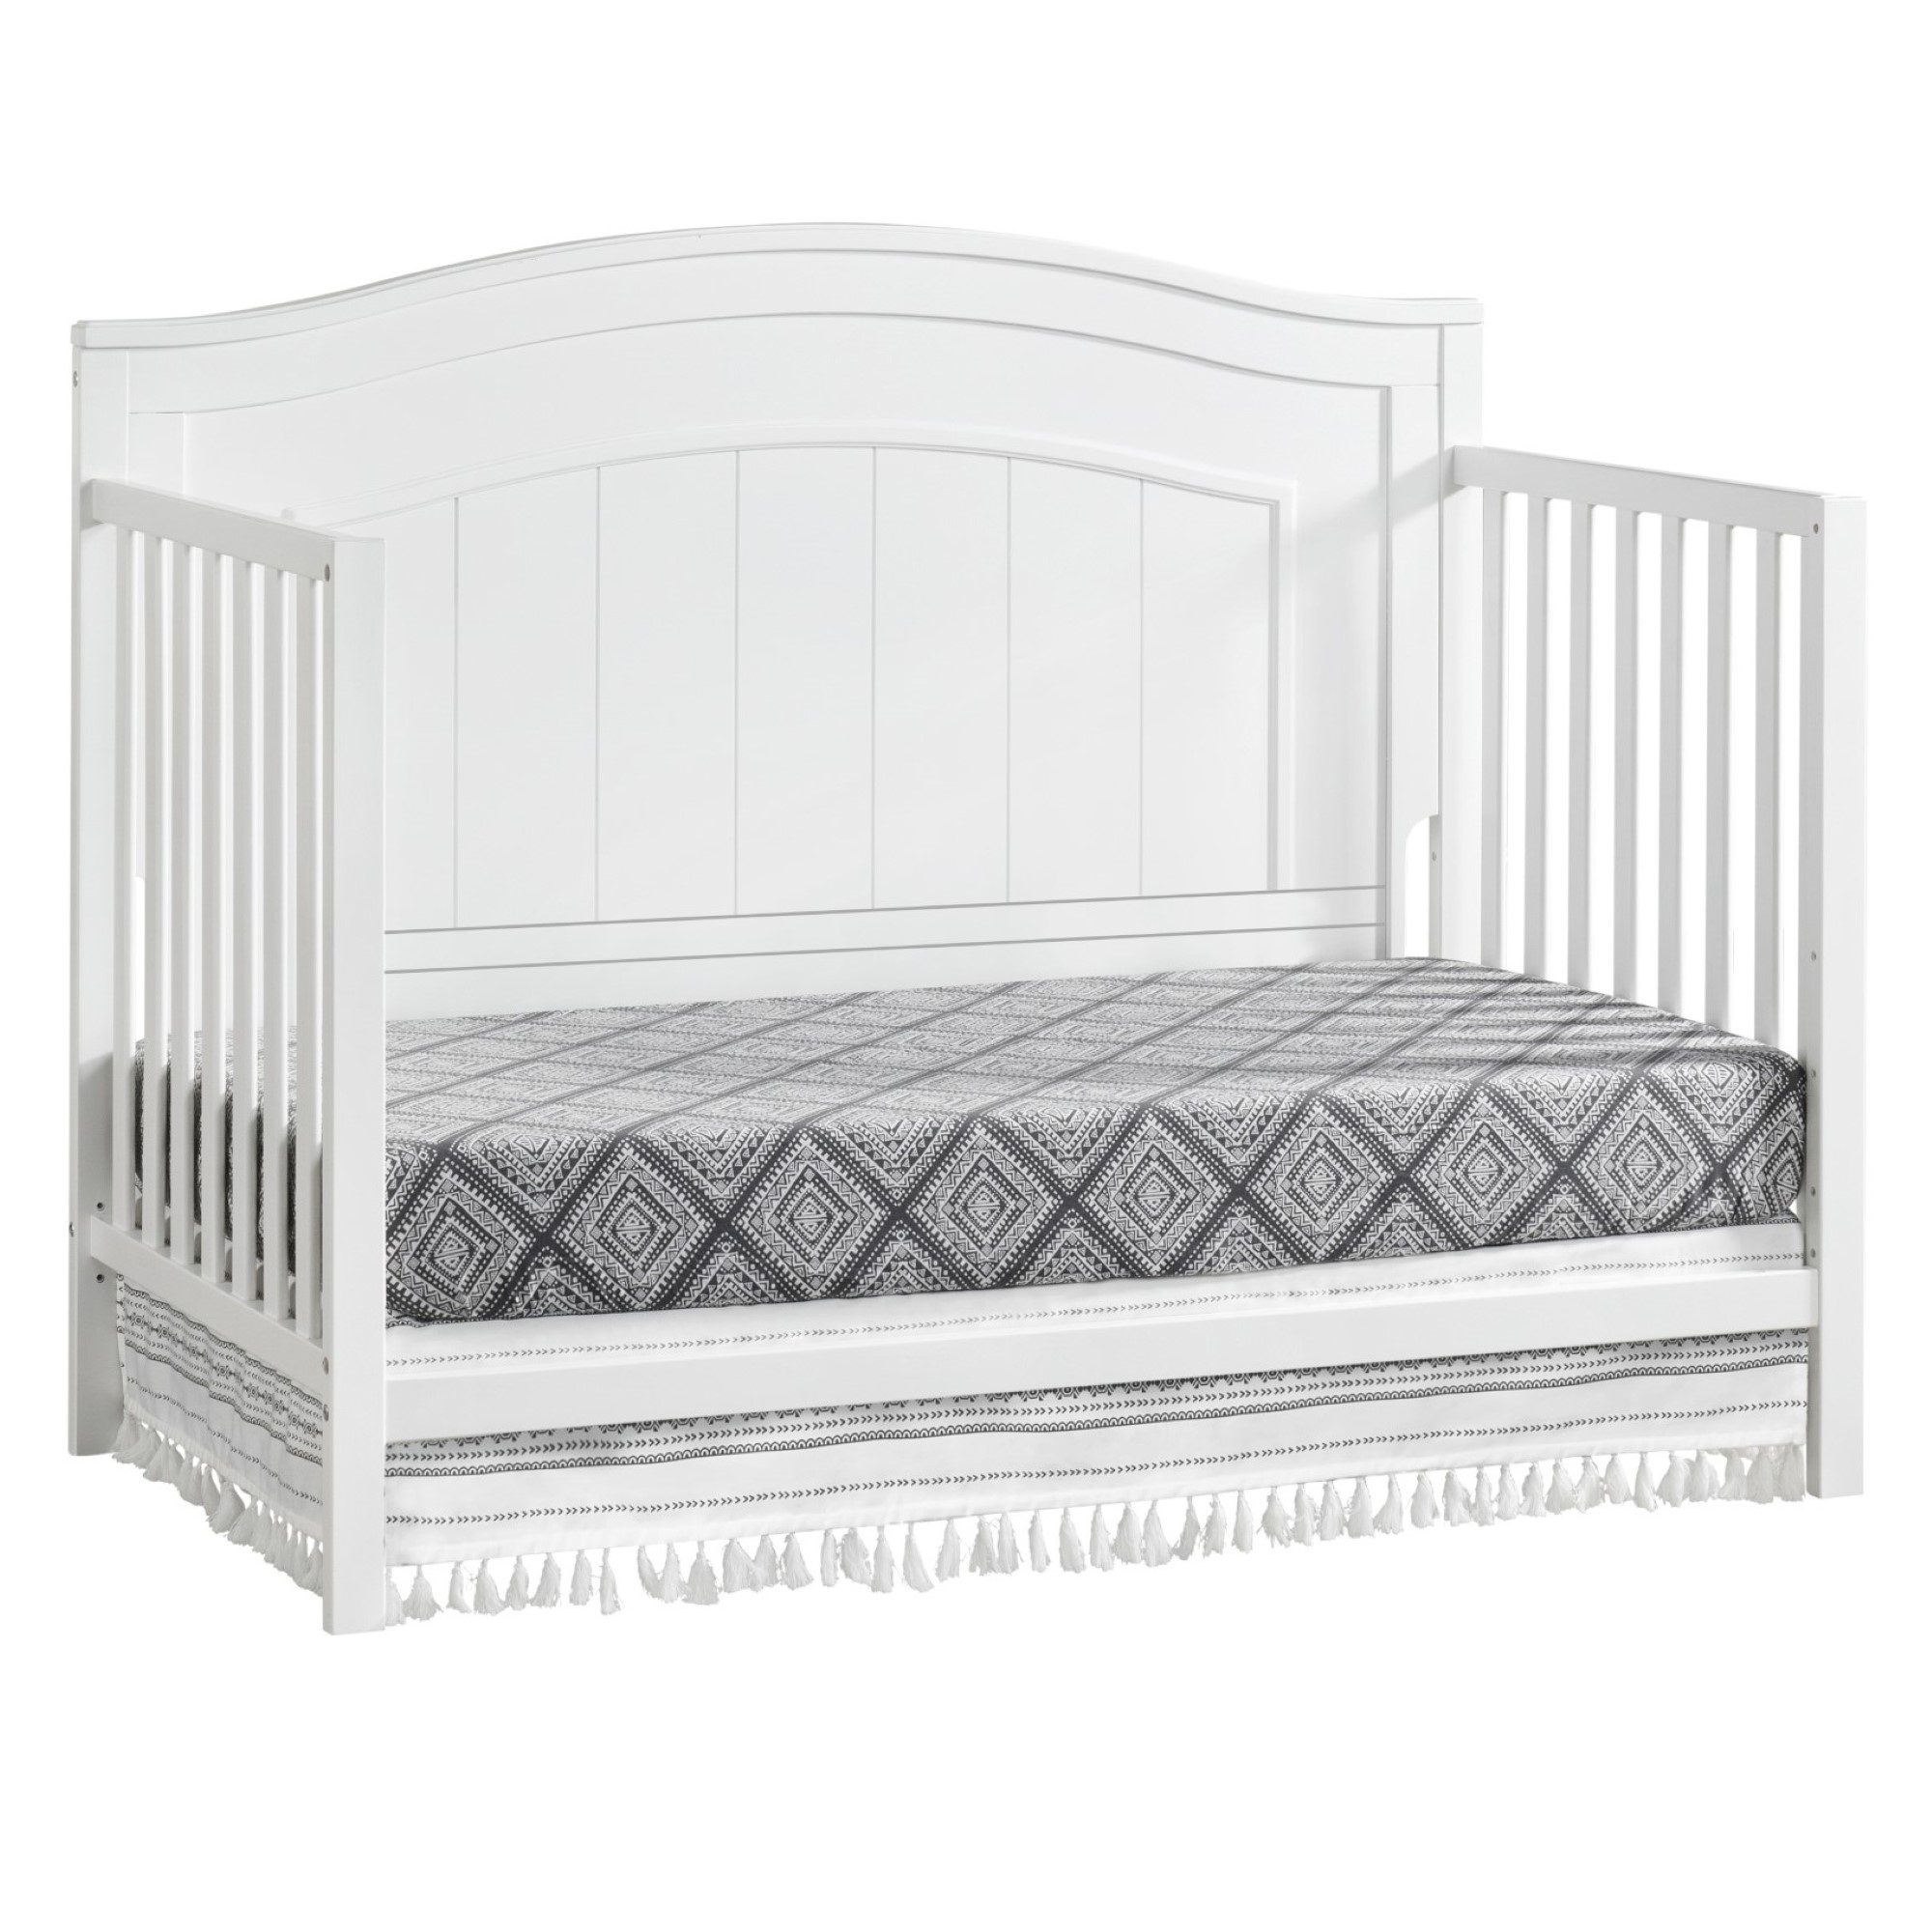 Oxford Baby North Bay 4-in-1 Convertible Crib, Snow White, GREENGUARD Gold Certified, Wooden Crib - image 3 of 4